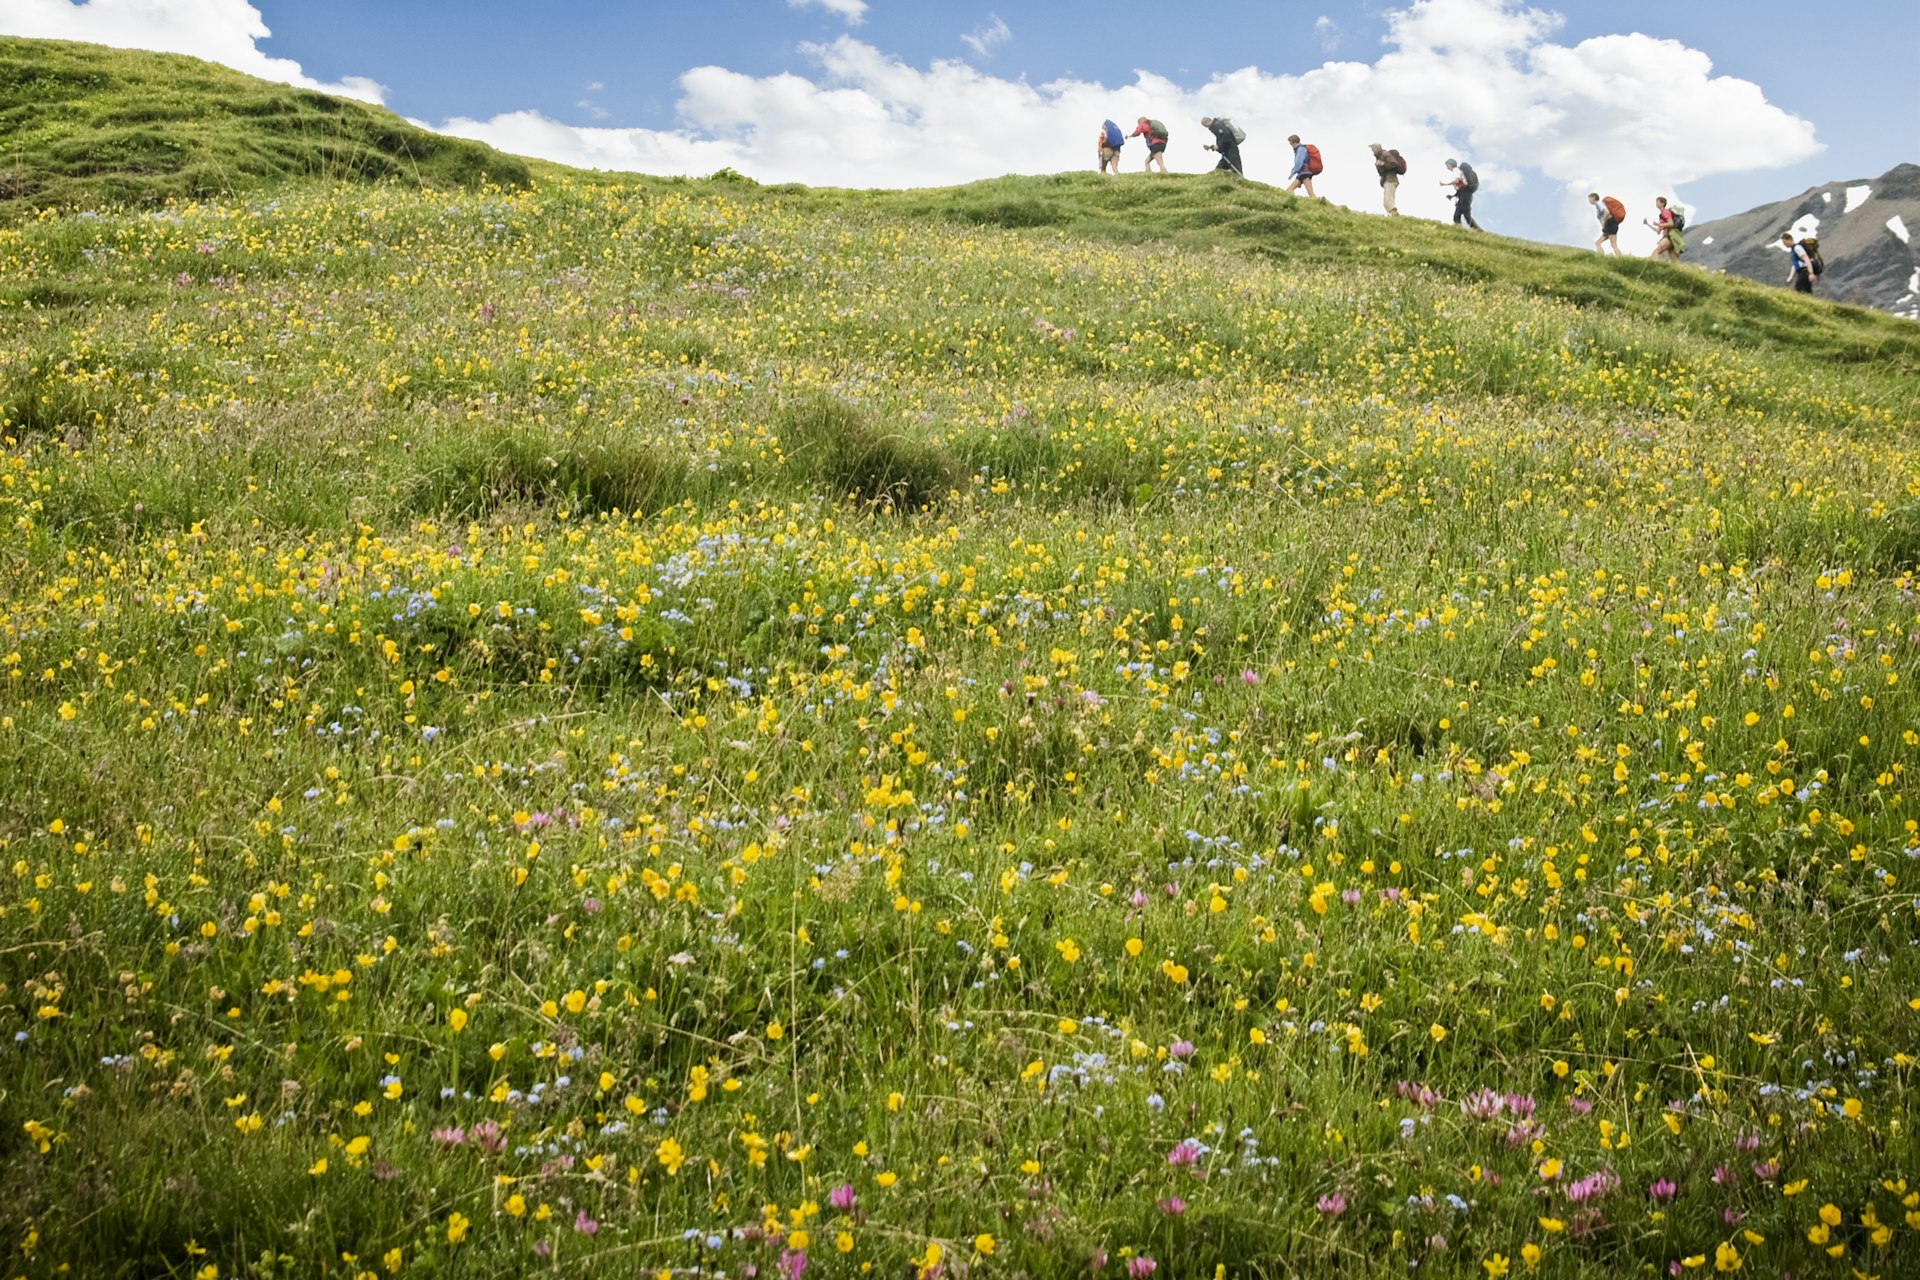 The abundant wildflowers you'll find throughout the Swiss Alps